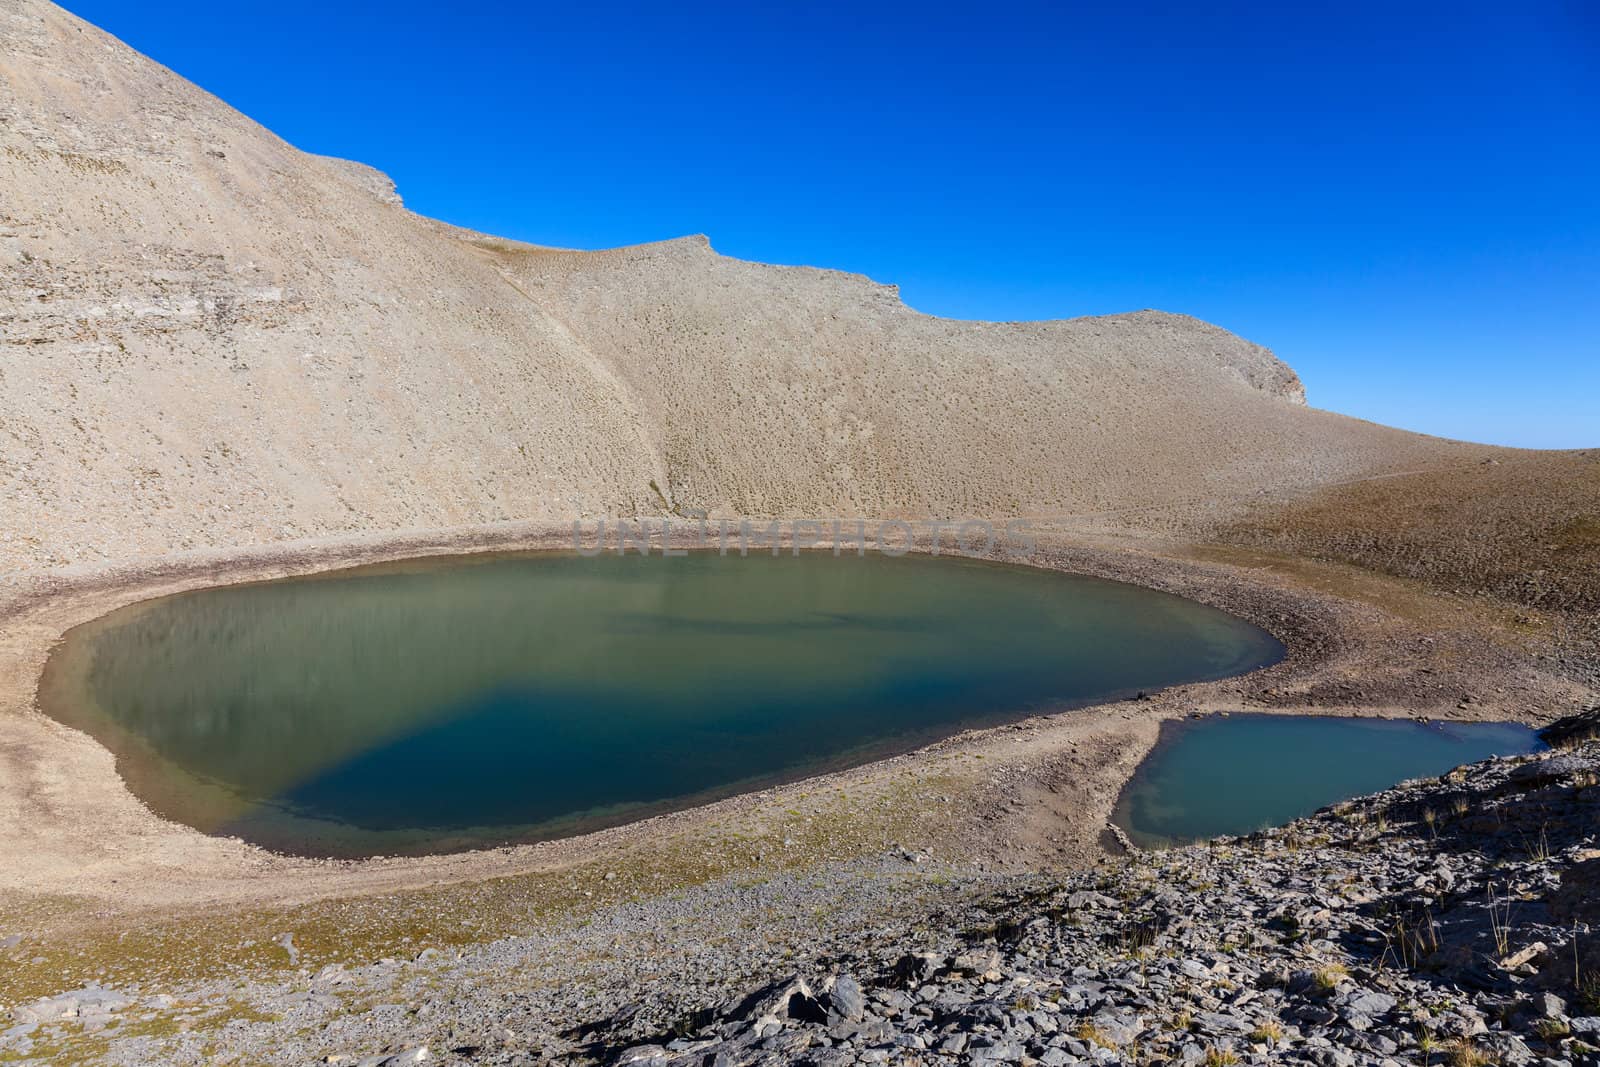 Image of "Lac des Garrets" (262 m) located in the Southern French Alps in Mercantour National Park. 